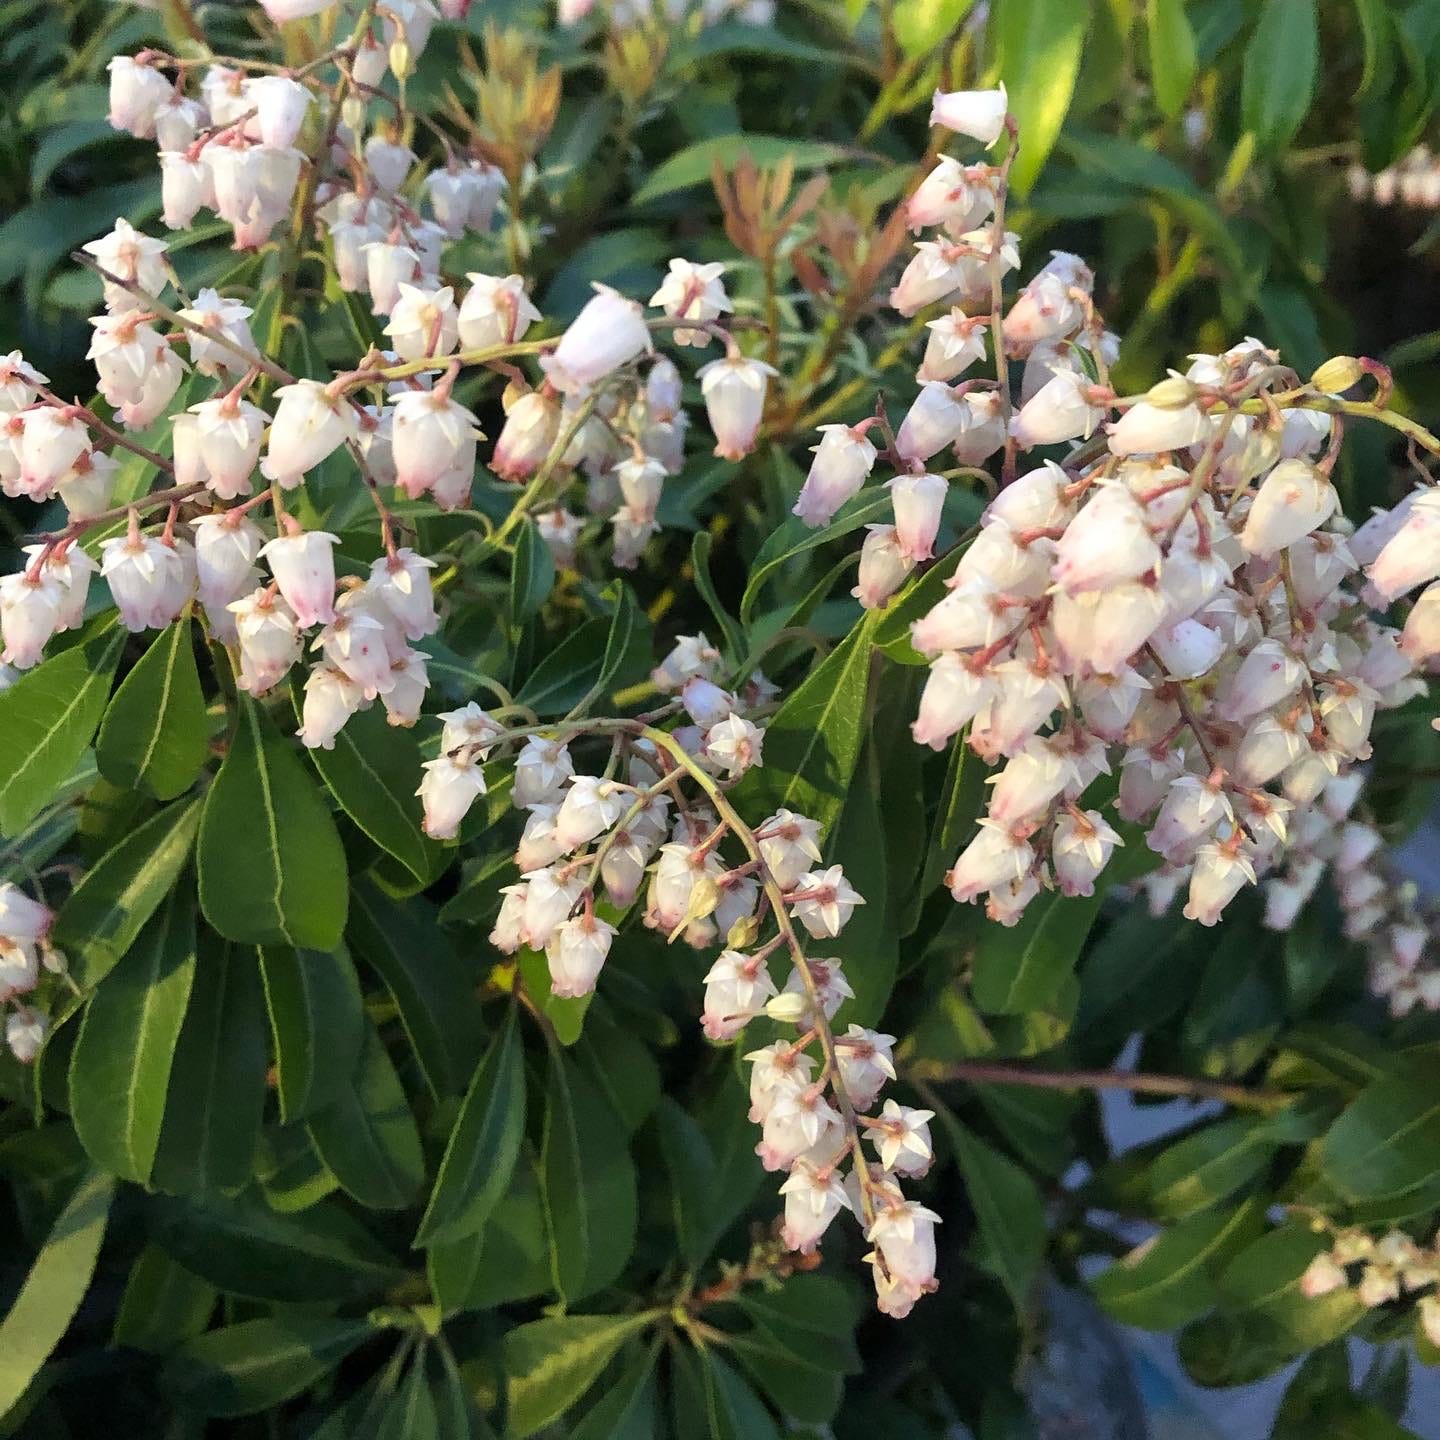 Japanese Andromeda, or miniature lily-of-the-valley; clusters of small white bell-shaped flowers with pink tips that hang in clusters like grapes on the vine.